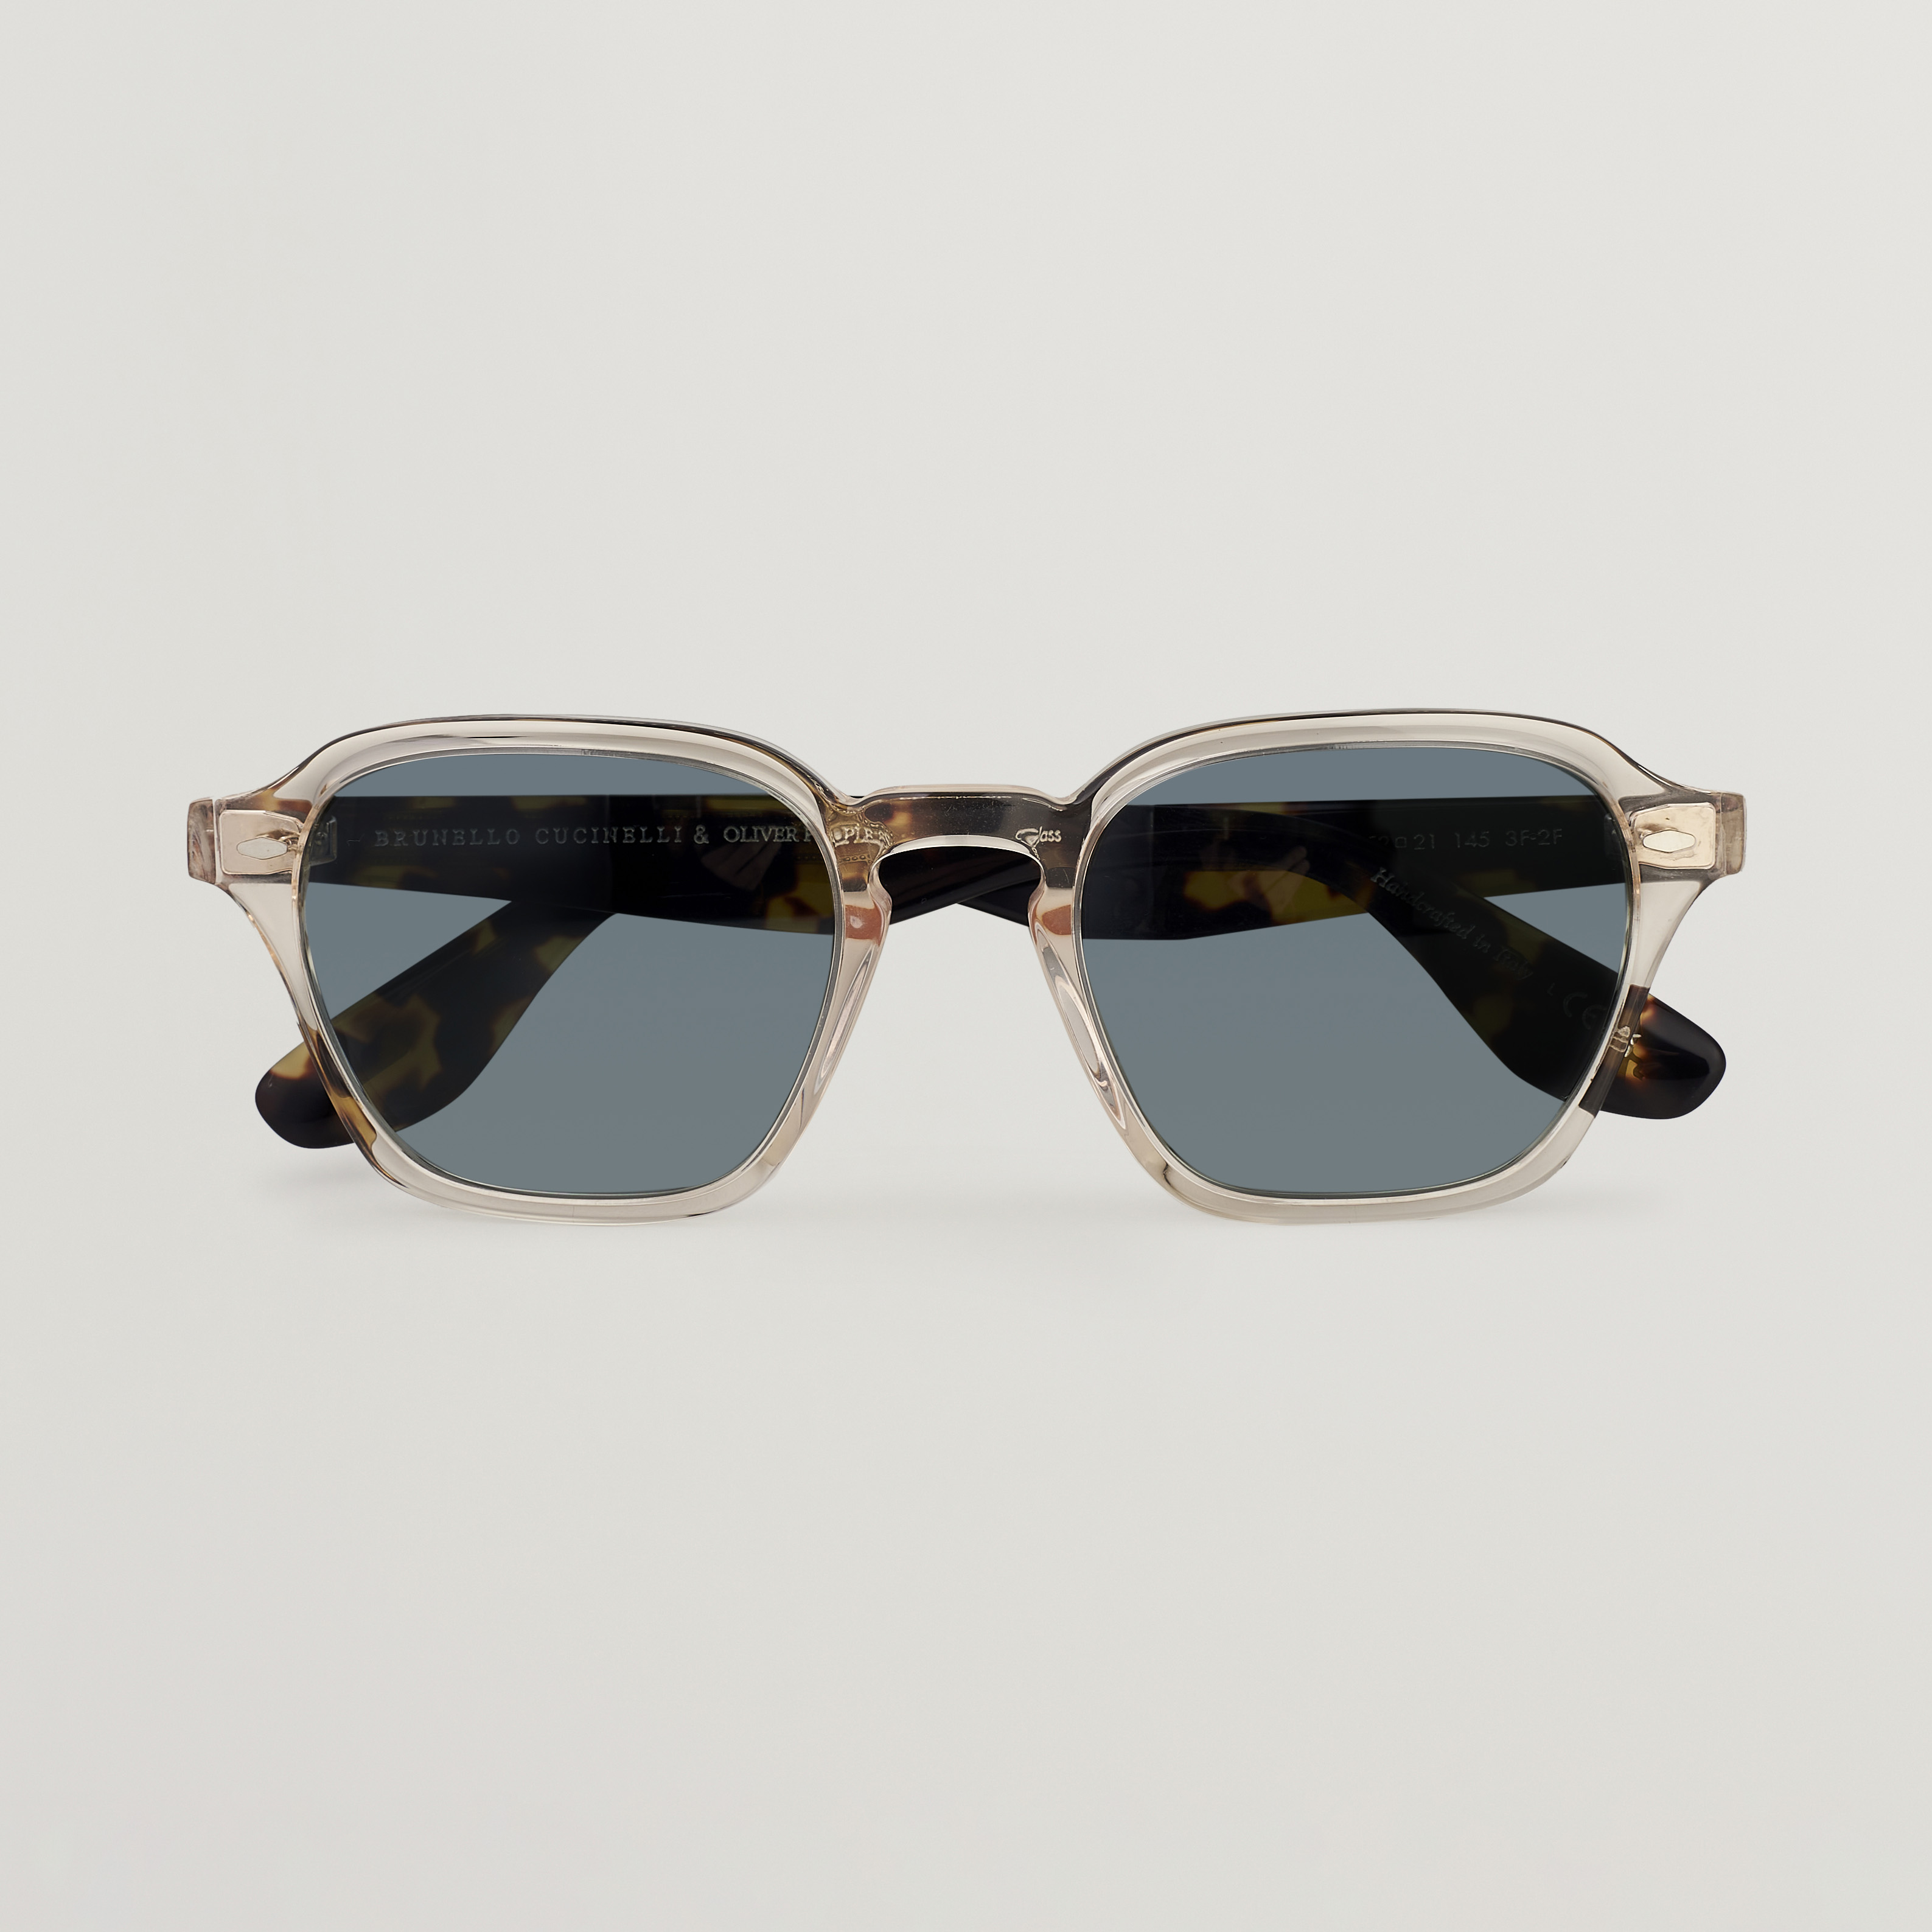 Oliver Peoples Griffo Sunglasses Tortoise - CareOfCar